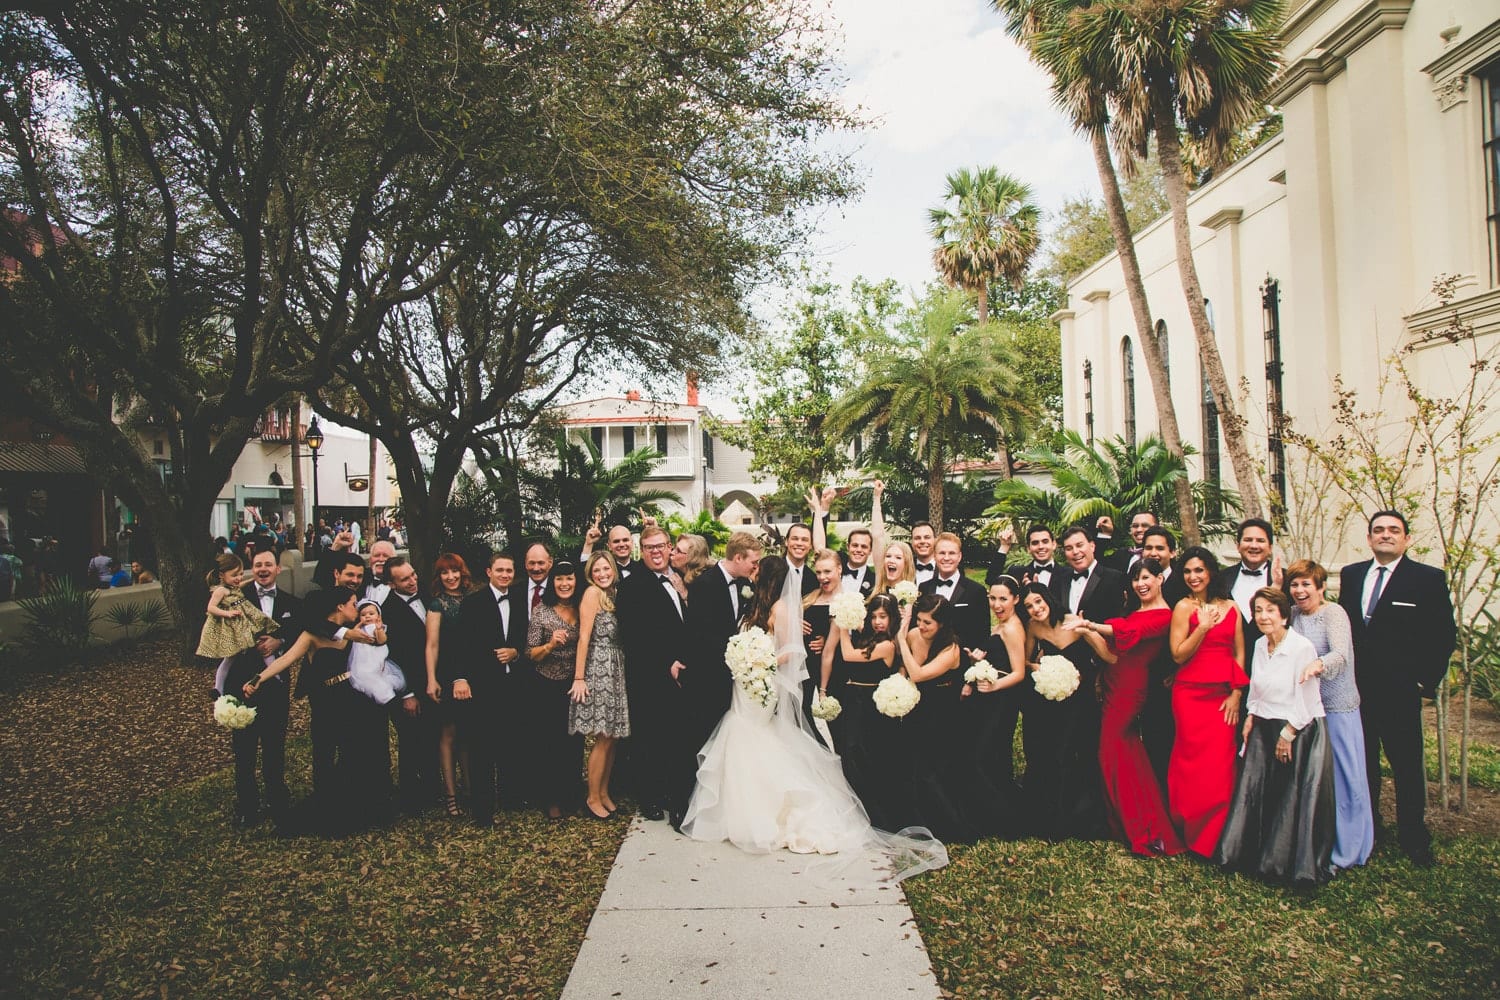 Wedding Guests | Modern St. Augustine Wedding at The Treasury on The Plaza